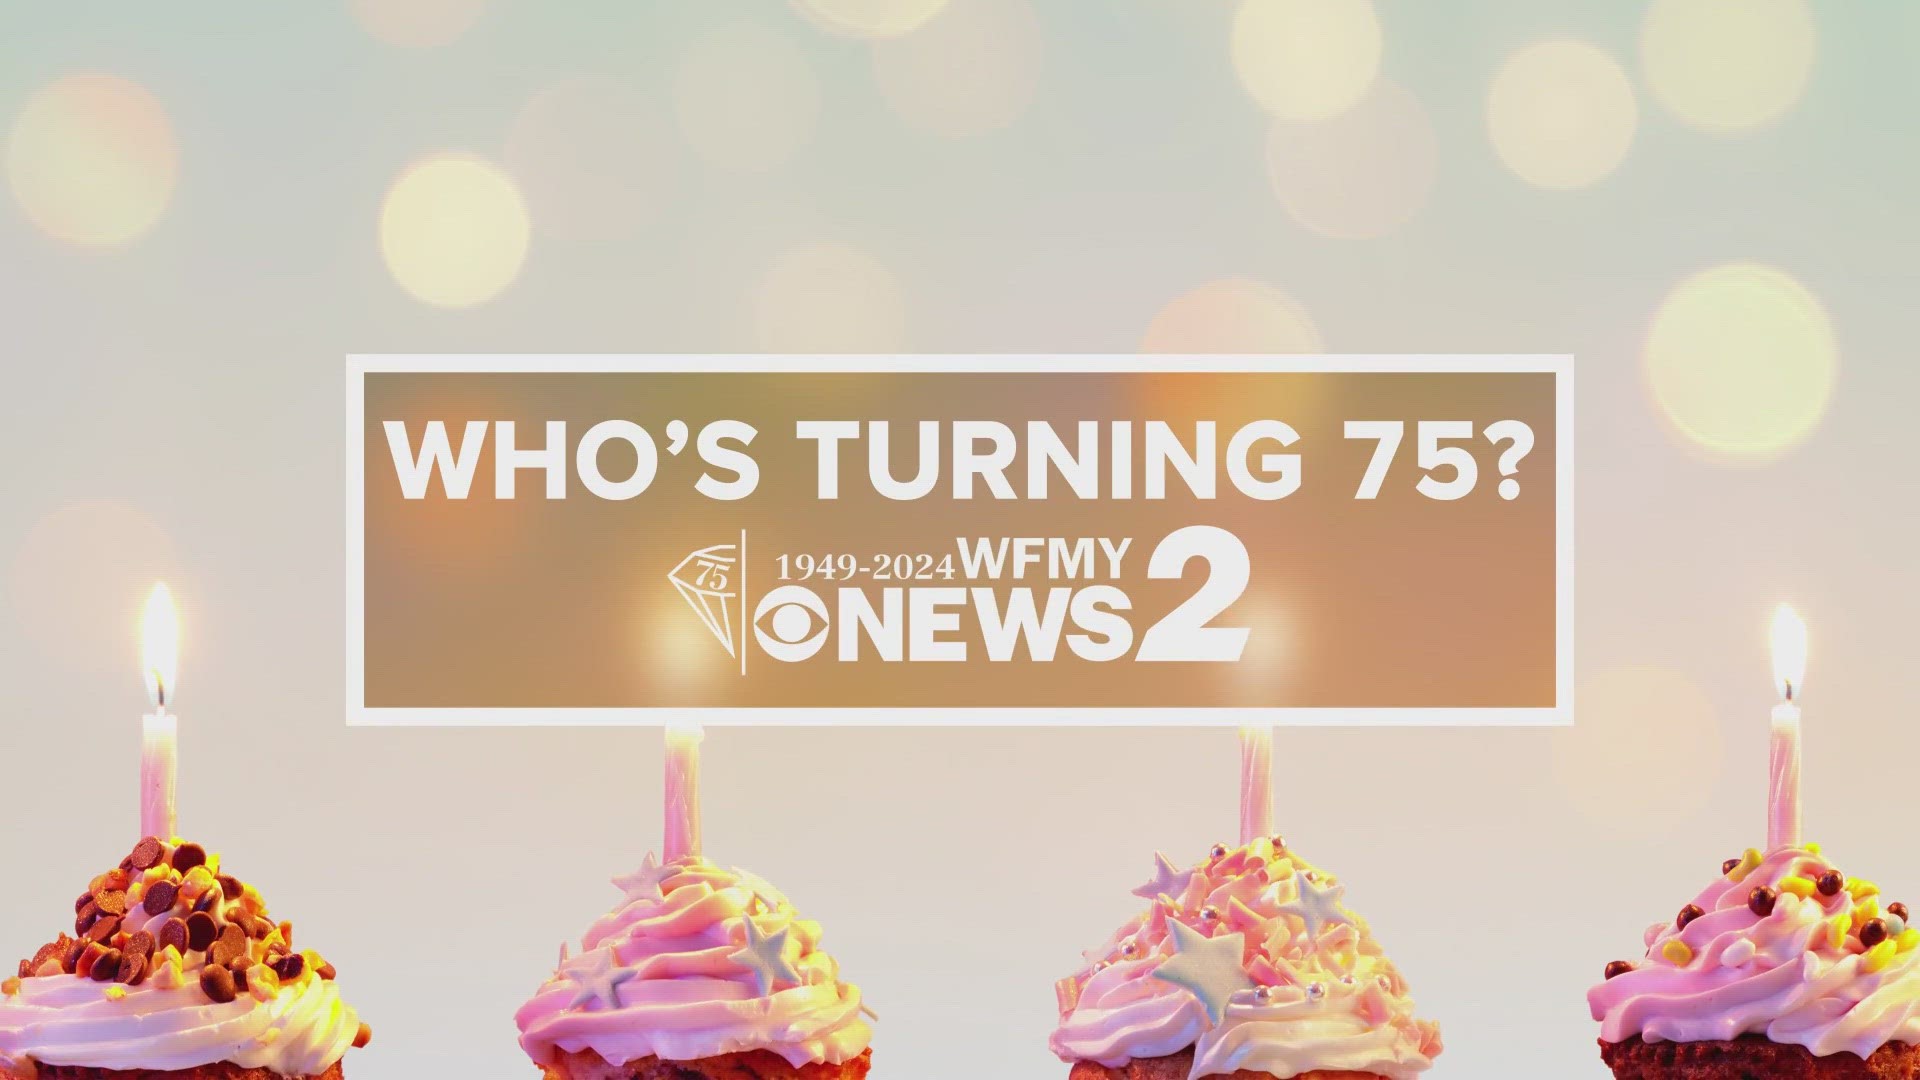 As WFMY News 2 celebrates turning 75 in 2024, we also want to celebrate the members of our community who are also turning 75!